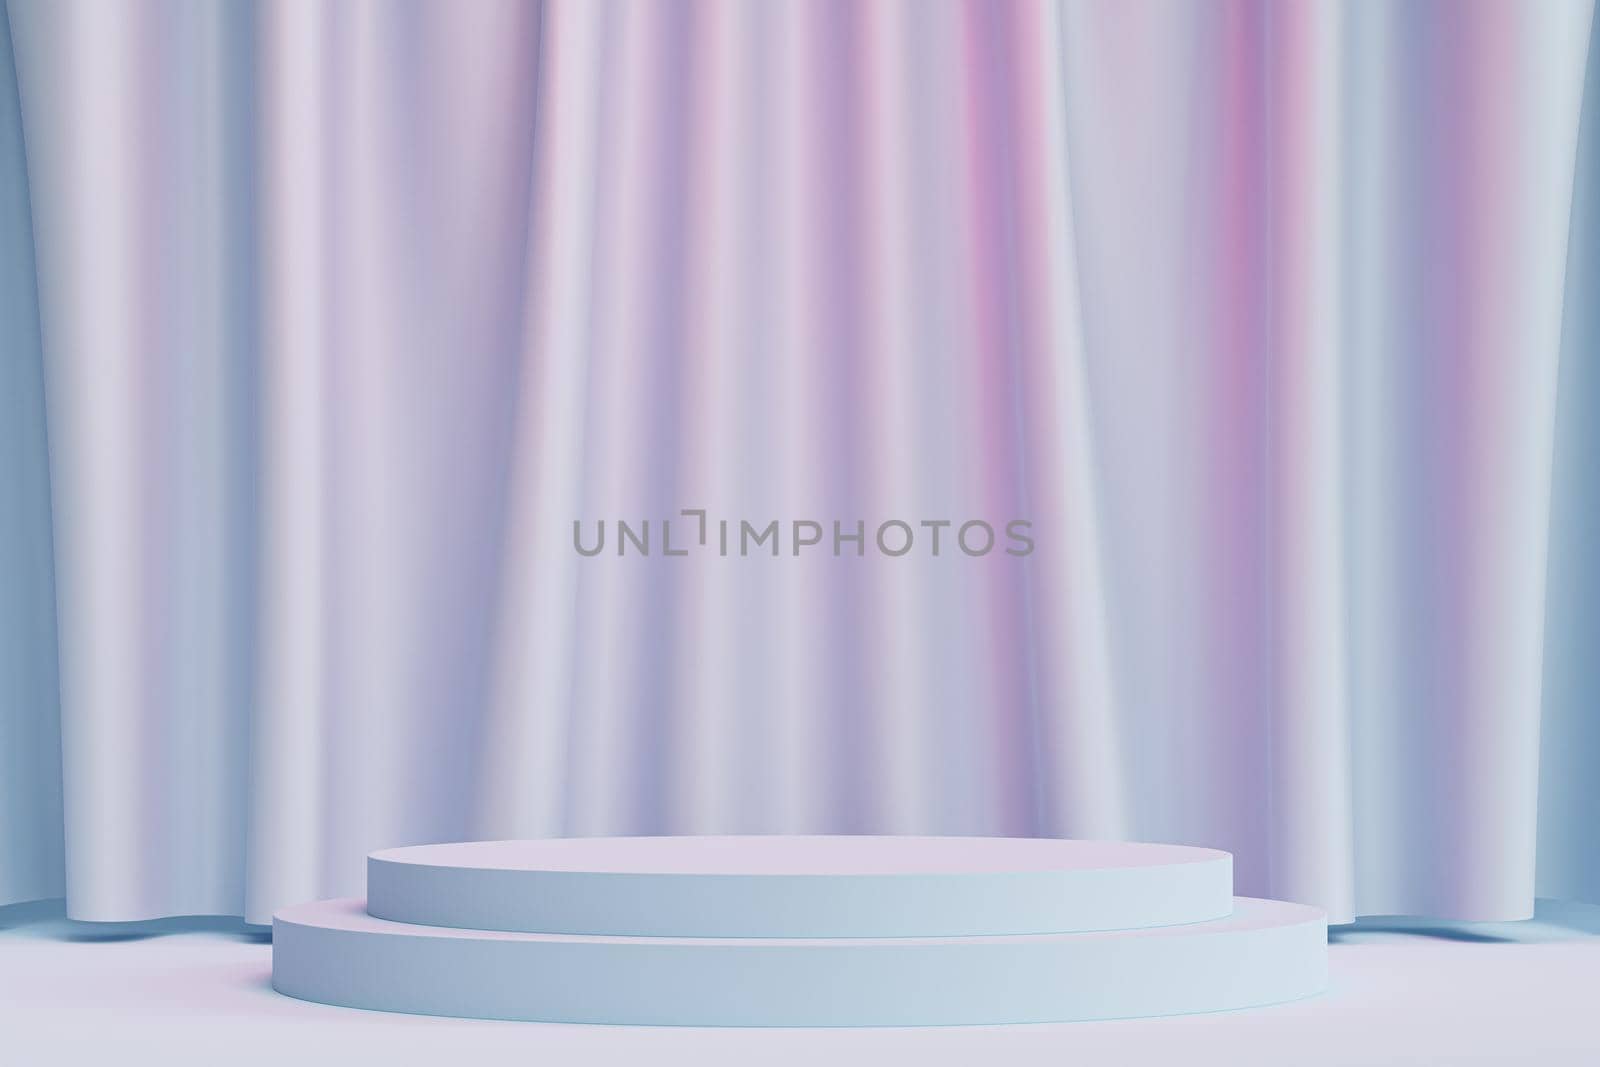 Cylinder podium or pedestal for products or advertising on neutral blue and pink background with curtains, minimal 3d illustration render by Frostroomhead